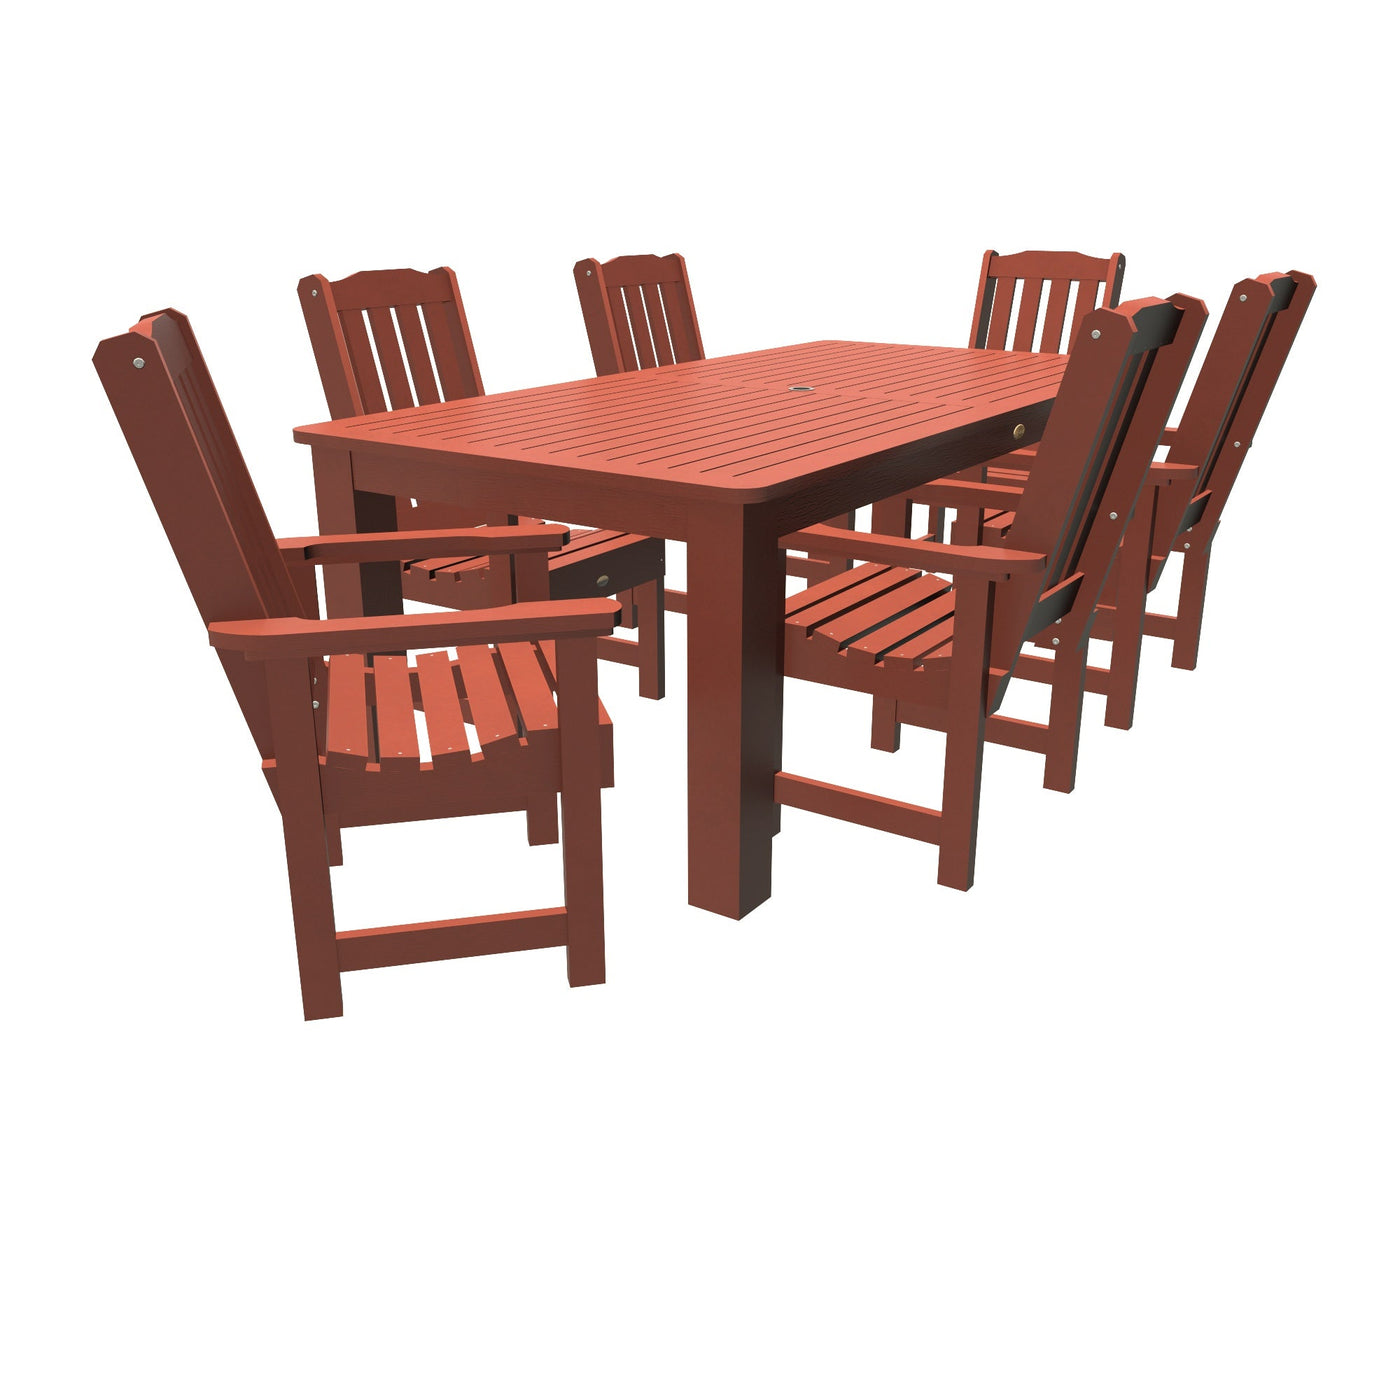 Lehigh 7pc Rectangular Outdoor Dining Set 42in x 84in - Dining Height Dining Highwood USA Rustic Red 